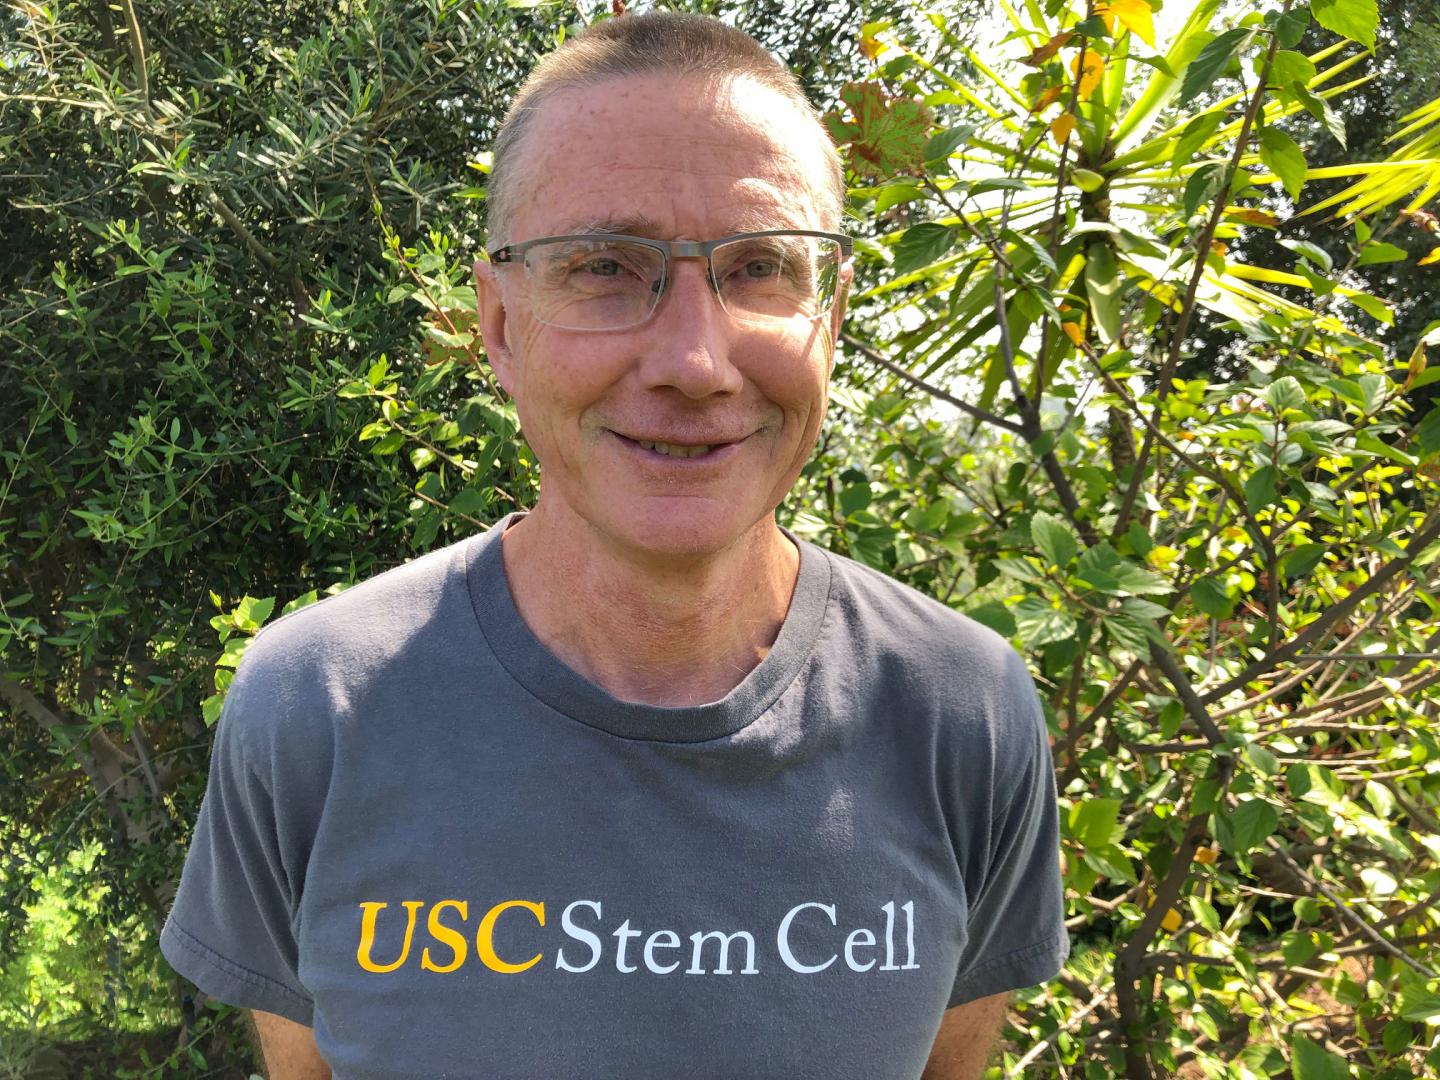 USC Professor Andrew P. McMahon elected to the National Academy of Sciences